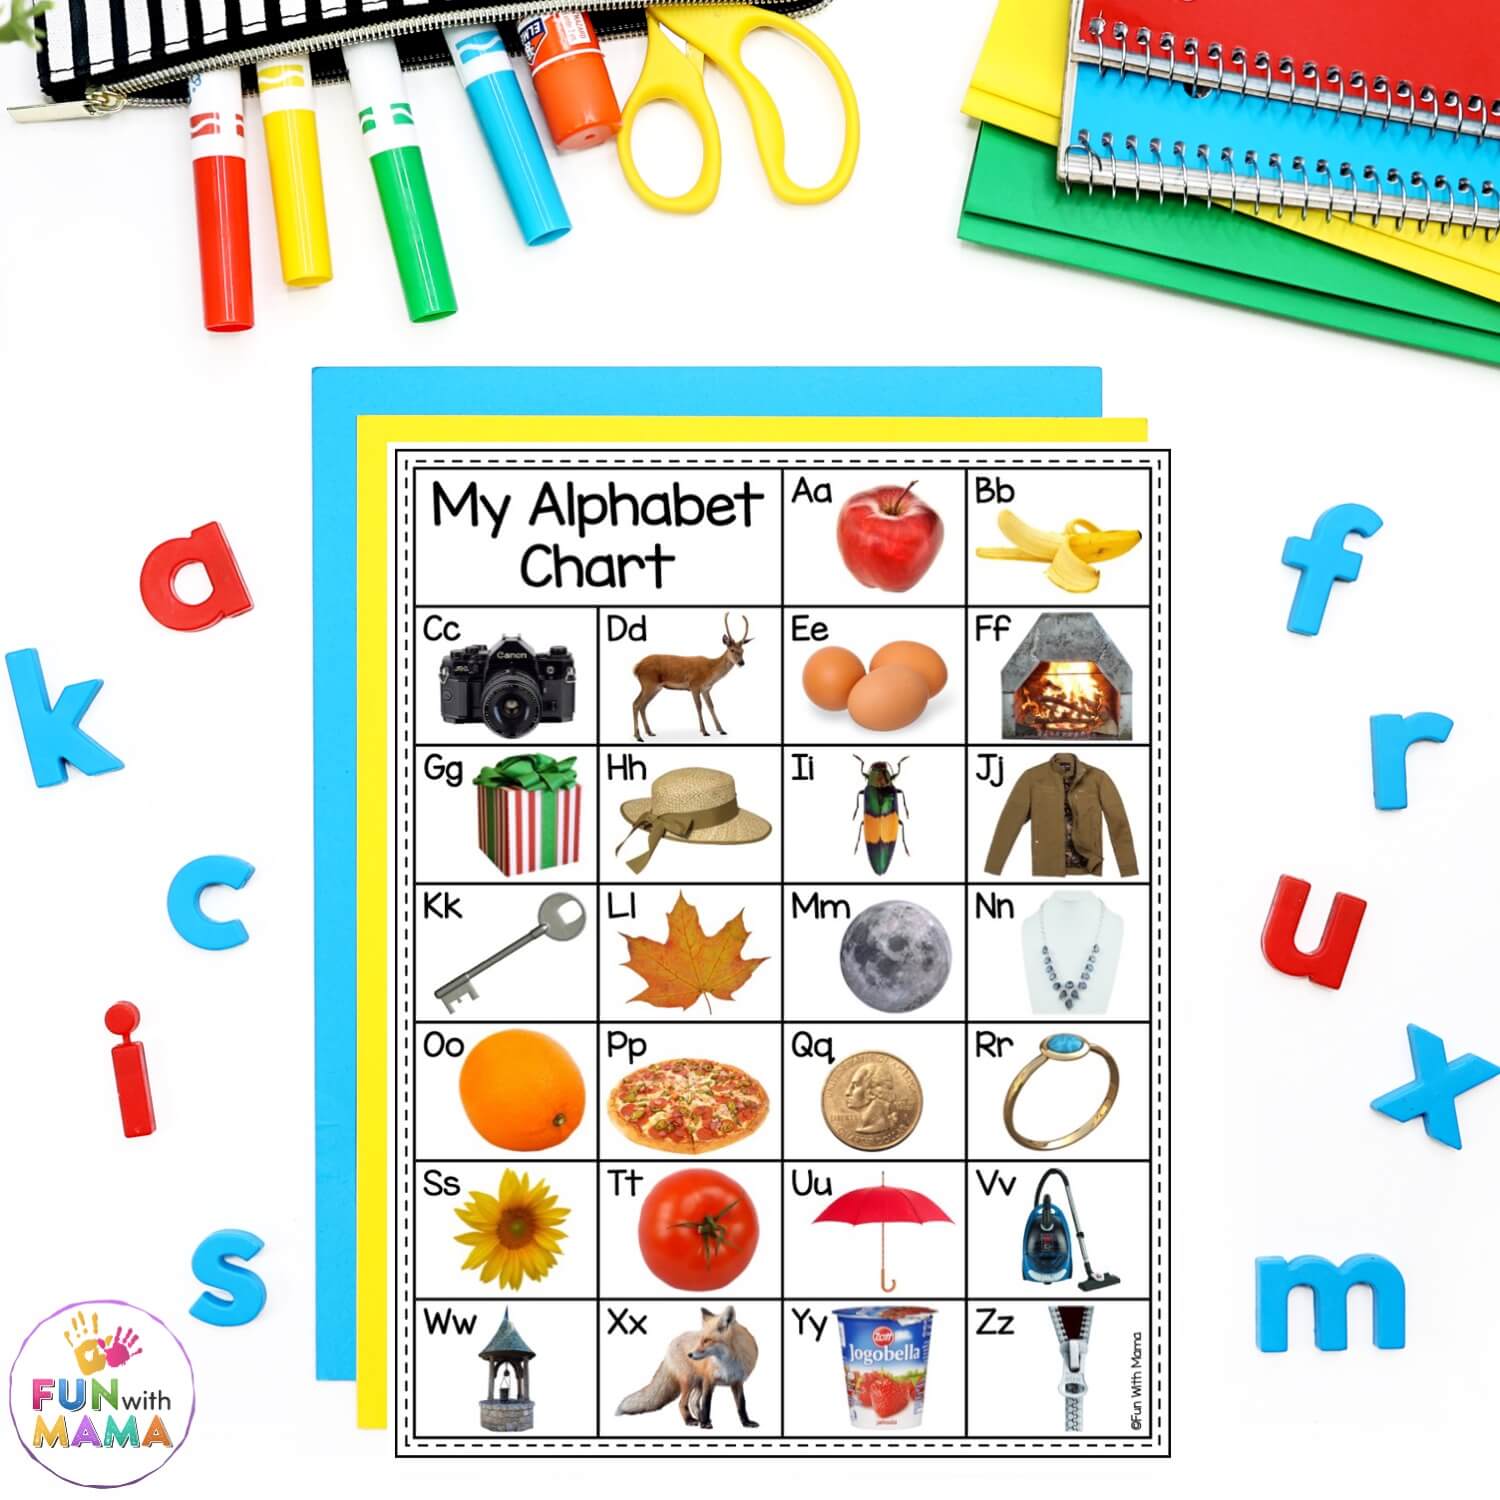 Alphabet chart with uppercase and lowercase letters and realistic images